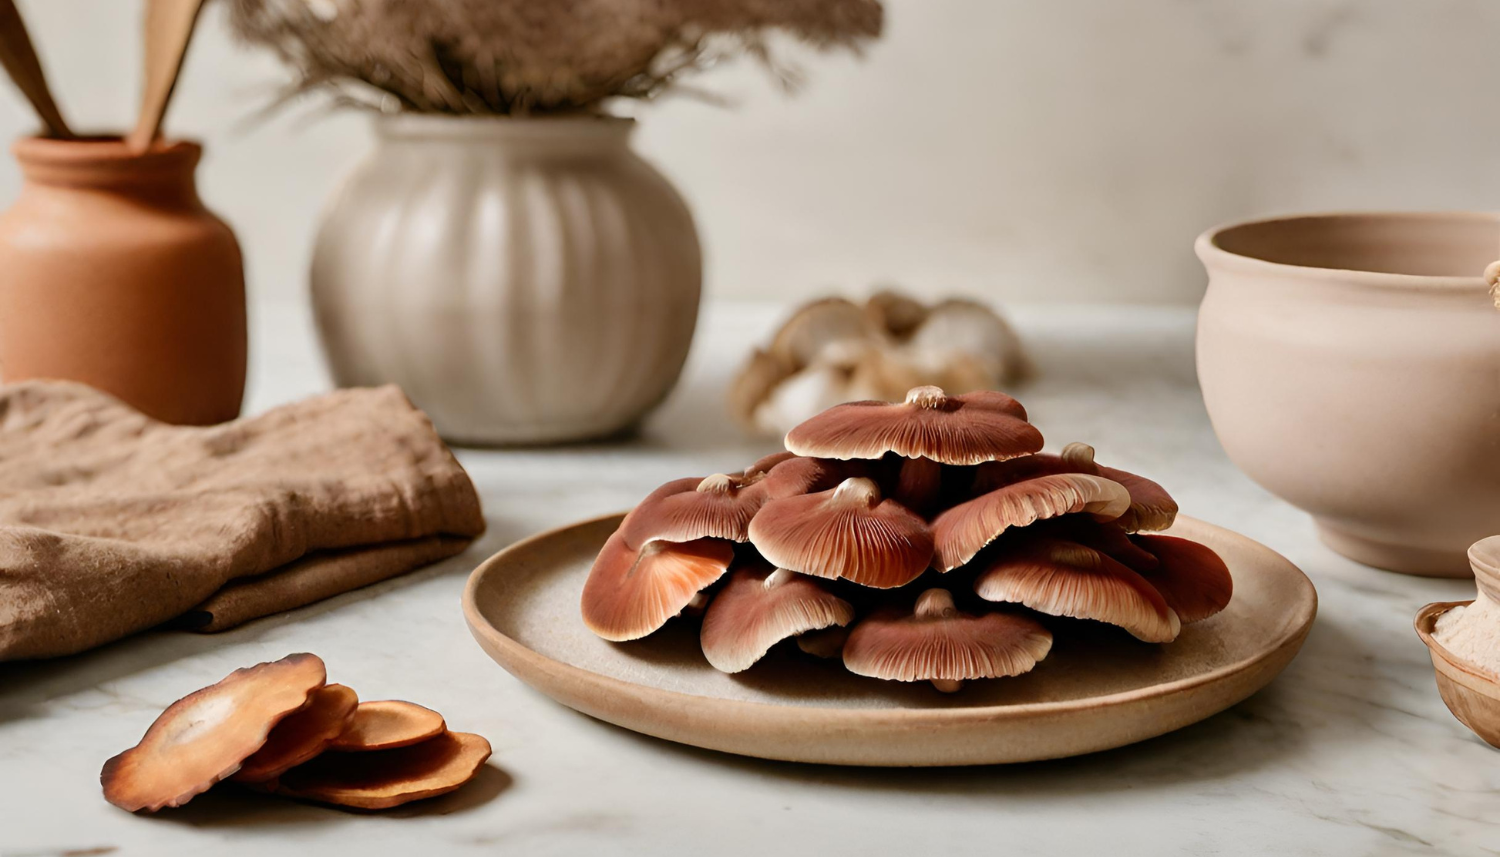 Different forms of Reishi in Kitchen